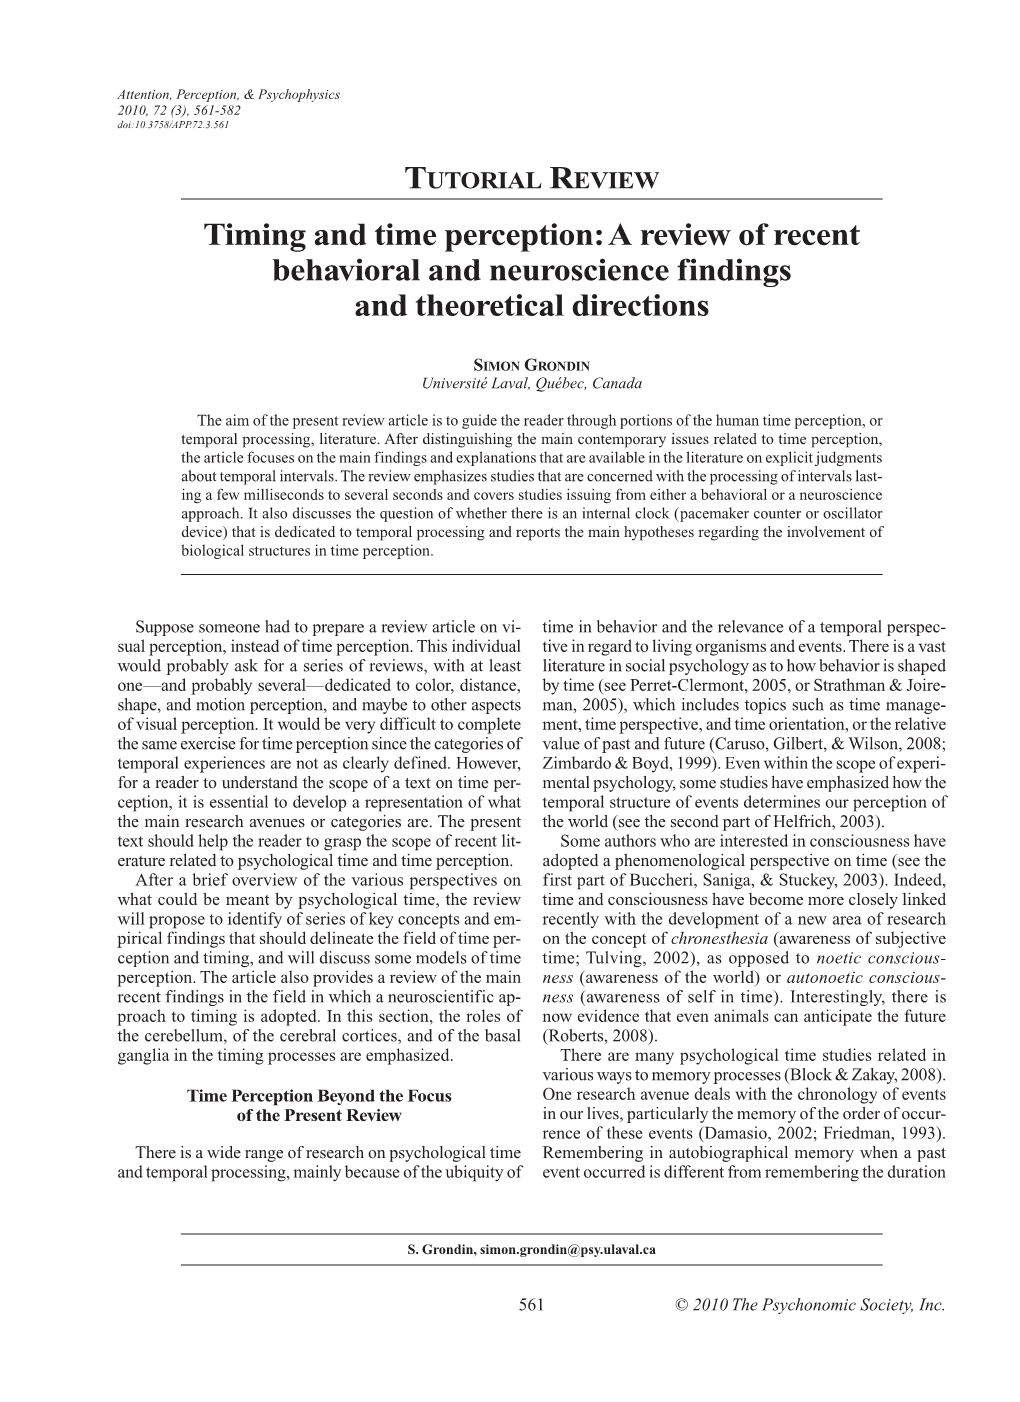 Timing and Time Perception: a Review of Recent Behavioral and Neuroscience Findings and Theoretical Directions